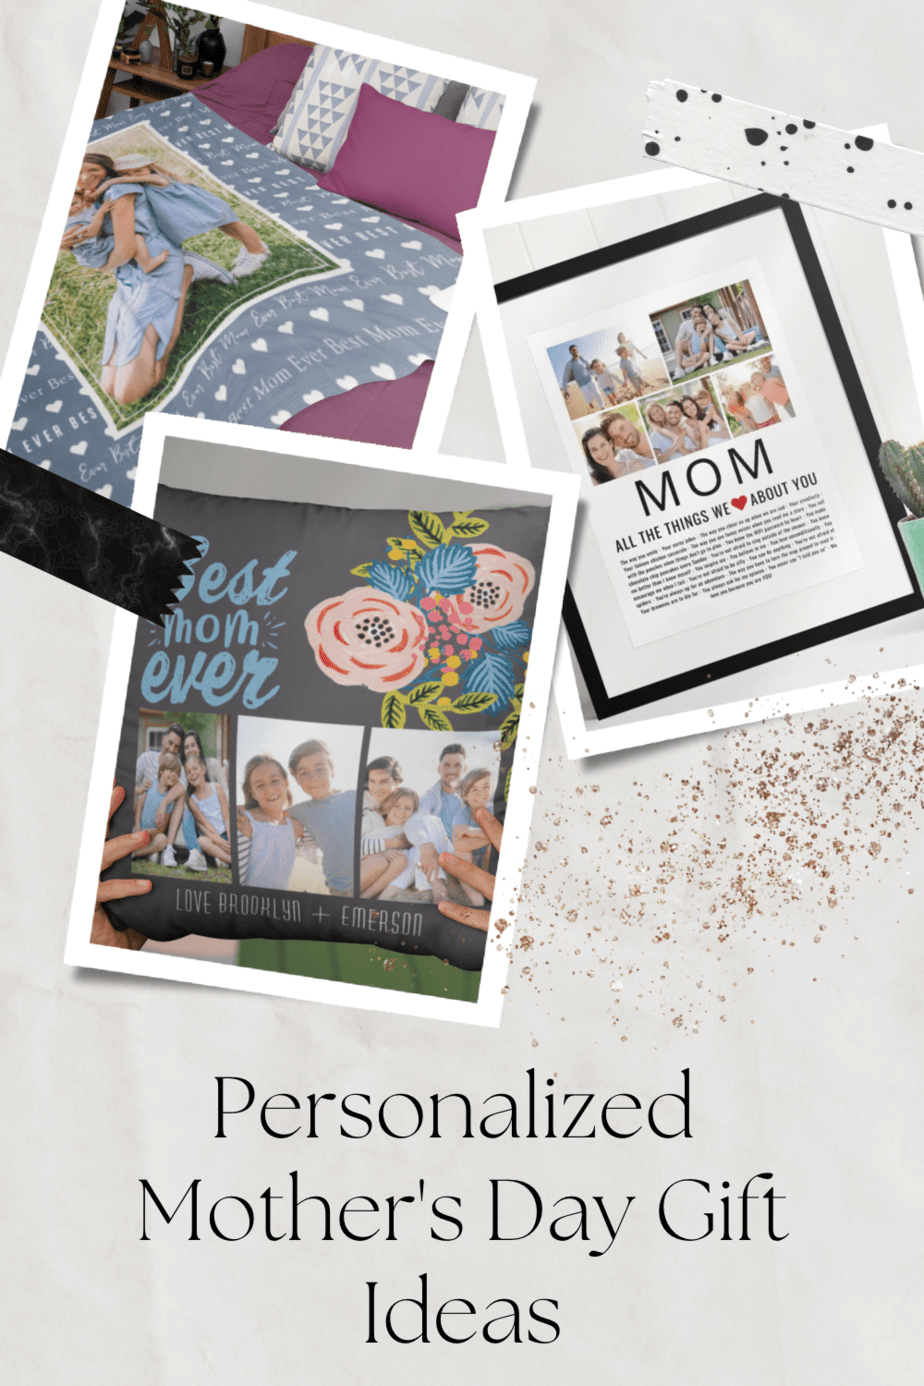 Check out our Mother's Day Gift guide to see all the wonderful personalized gifts for mom that she is sure to love!